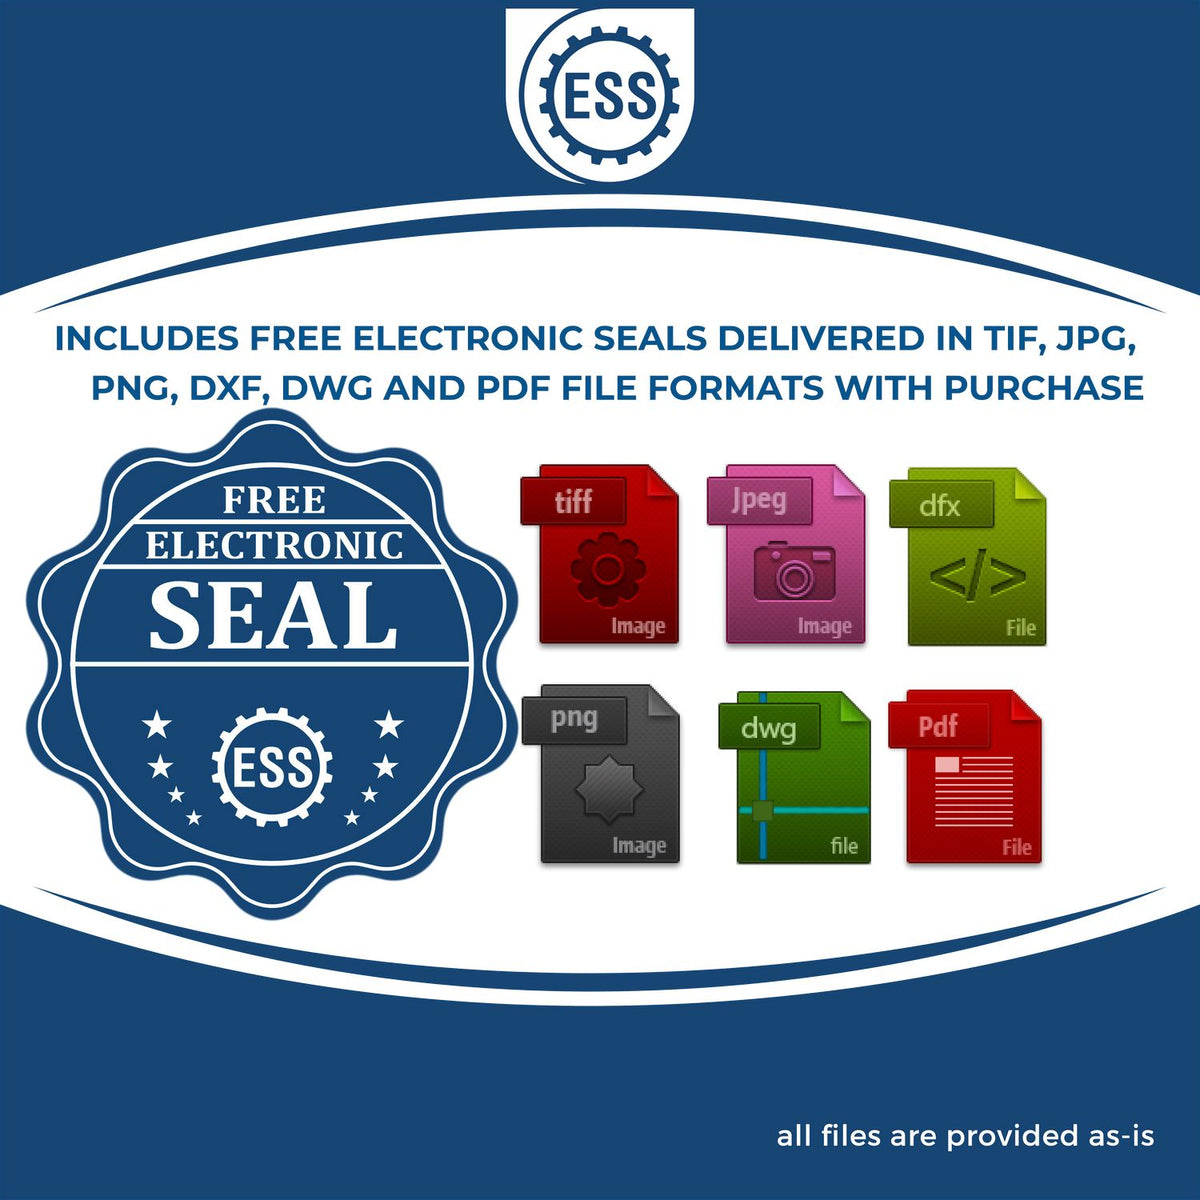 An infographic for the free electronic seal for the Tennessee Geologist Desk Seal illustrating the different file type icons such as DXF, DWG, TIF, JPG and PNG.